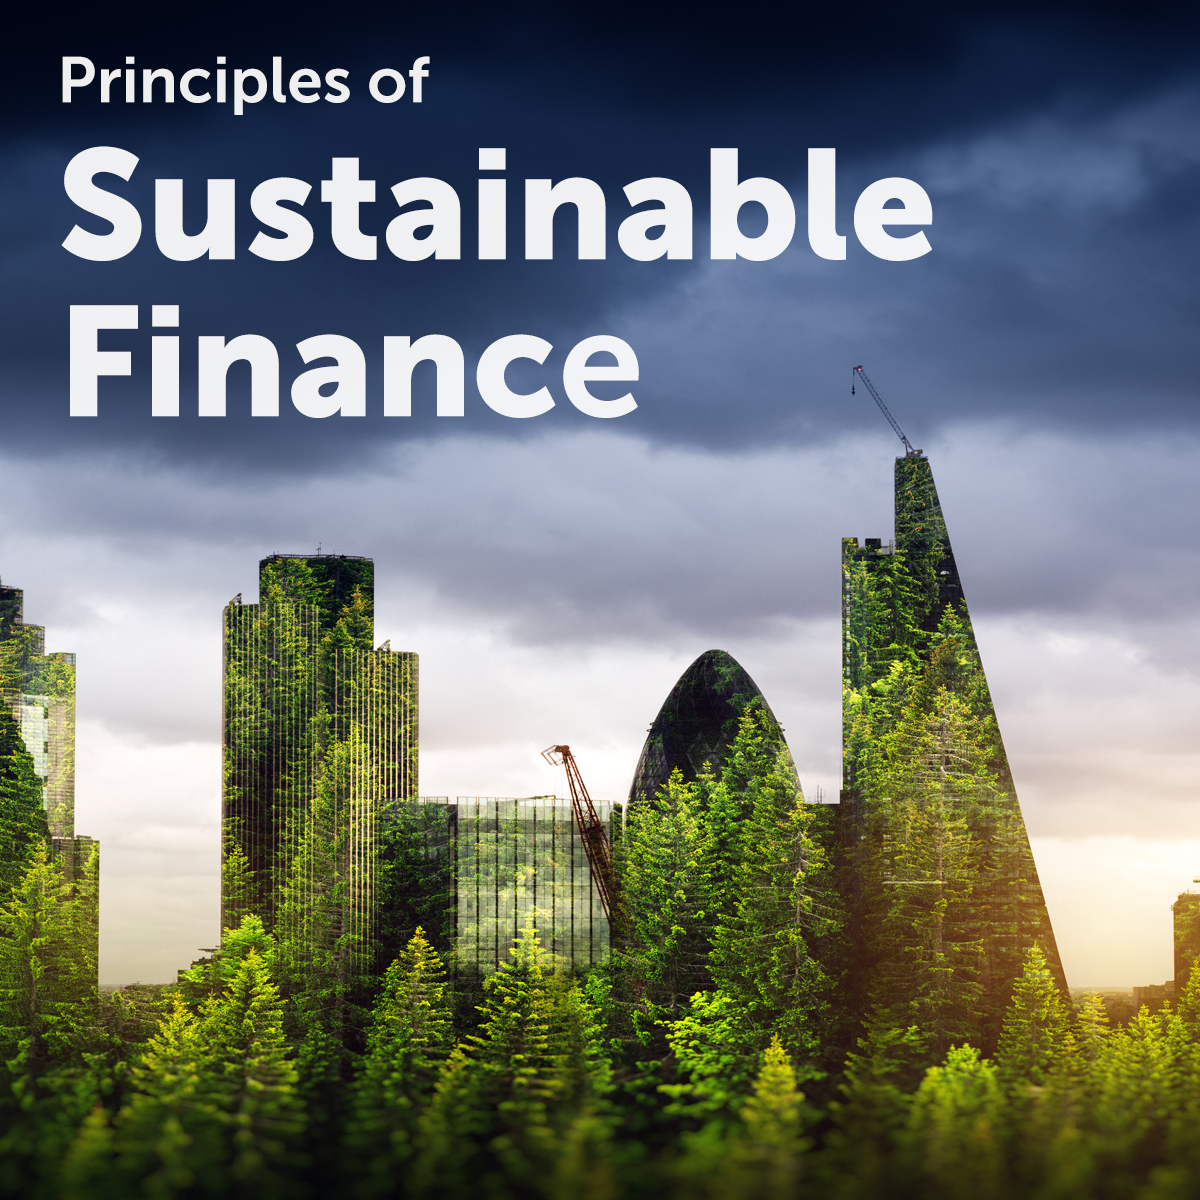 phd in sustainable finance